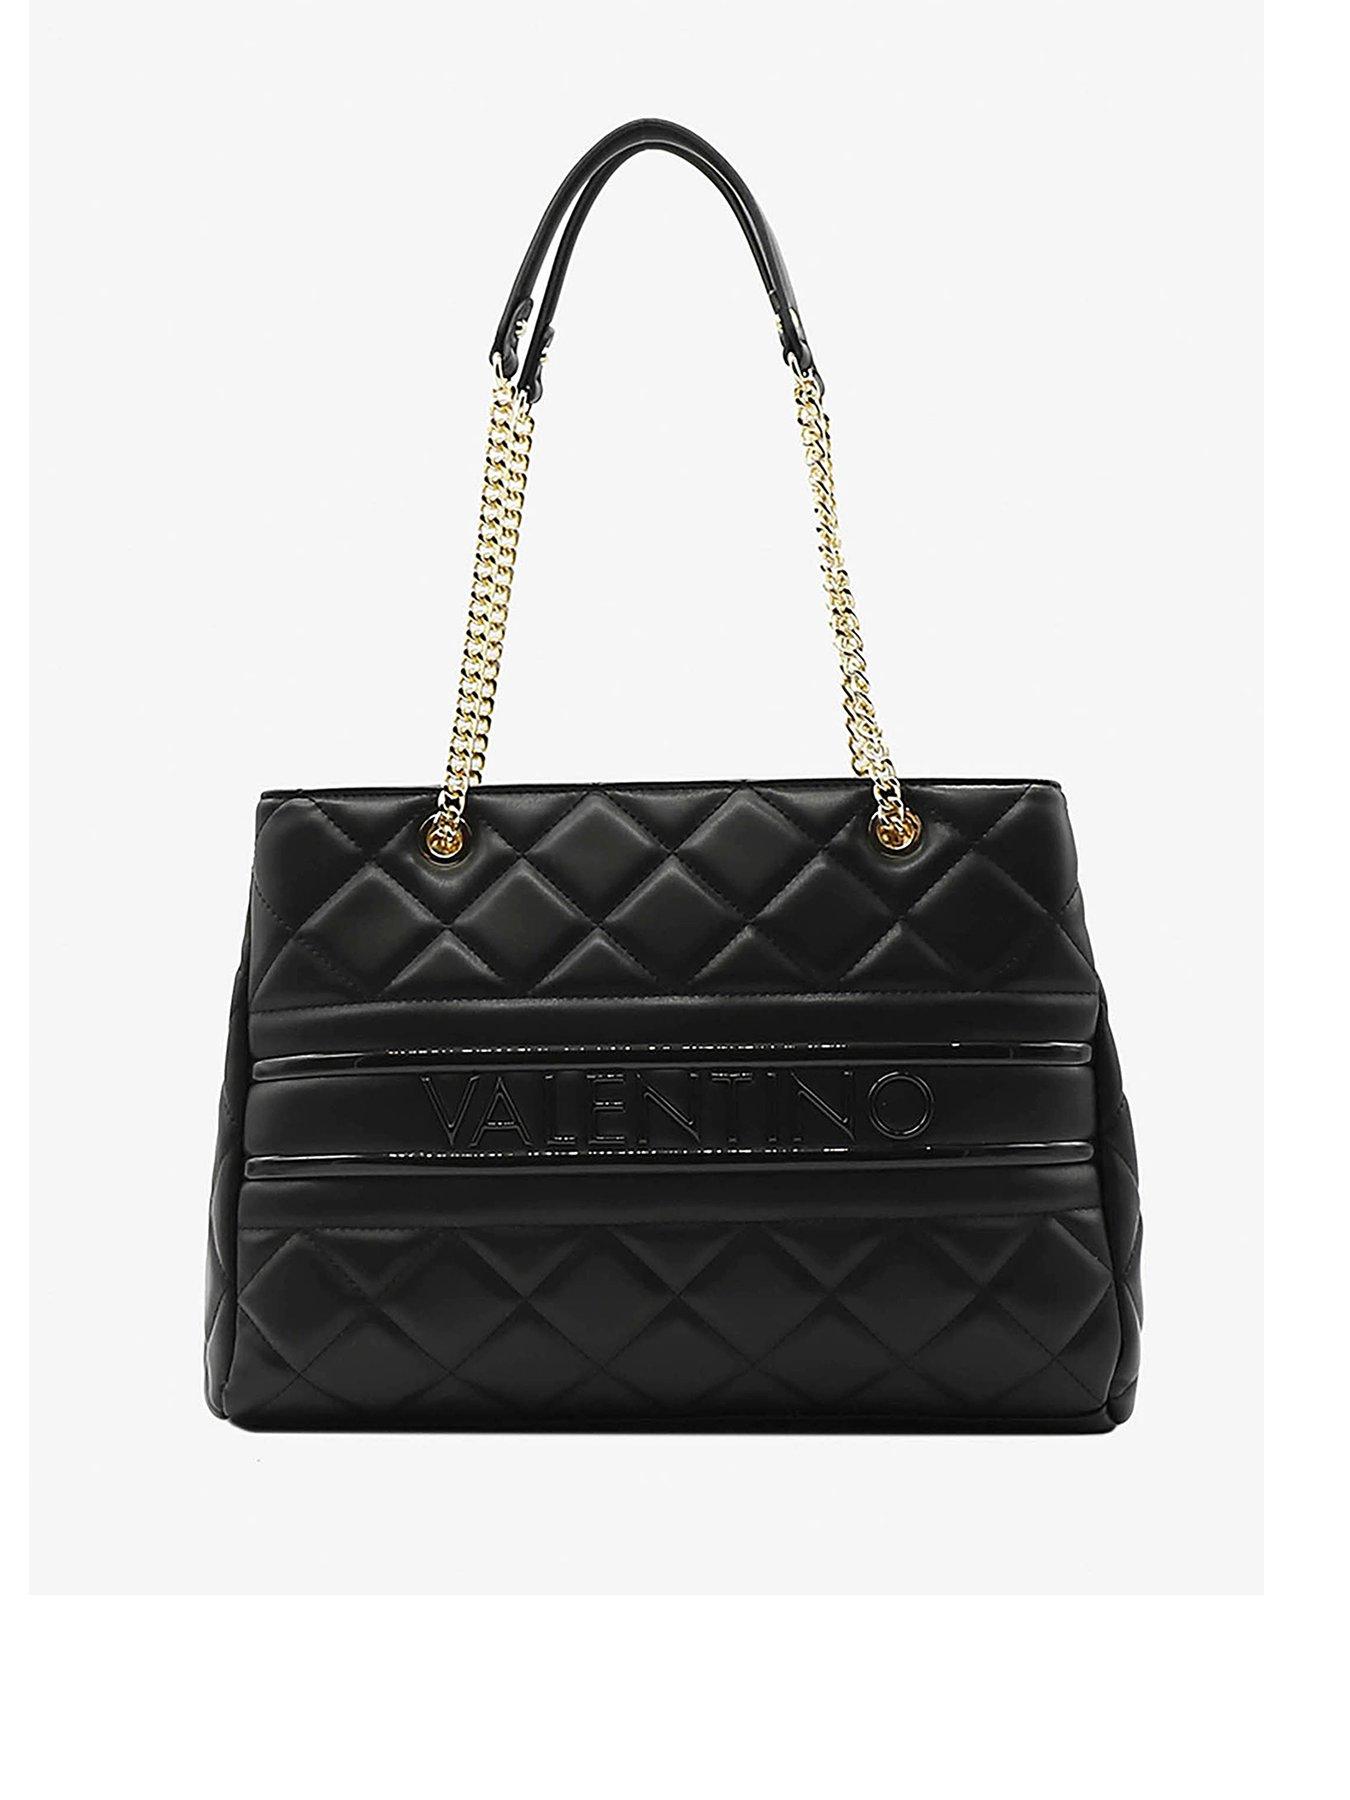 Chanel 22 Bag: The Hottest Accessory of the Season or a Passing